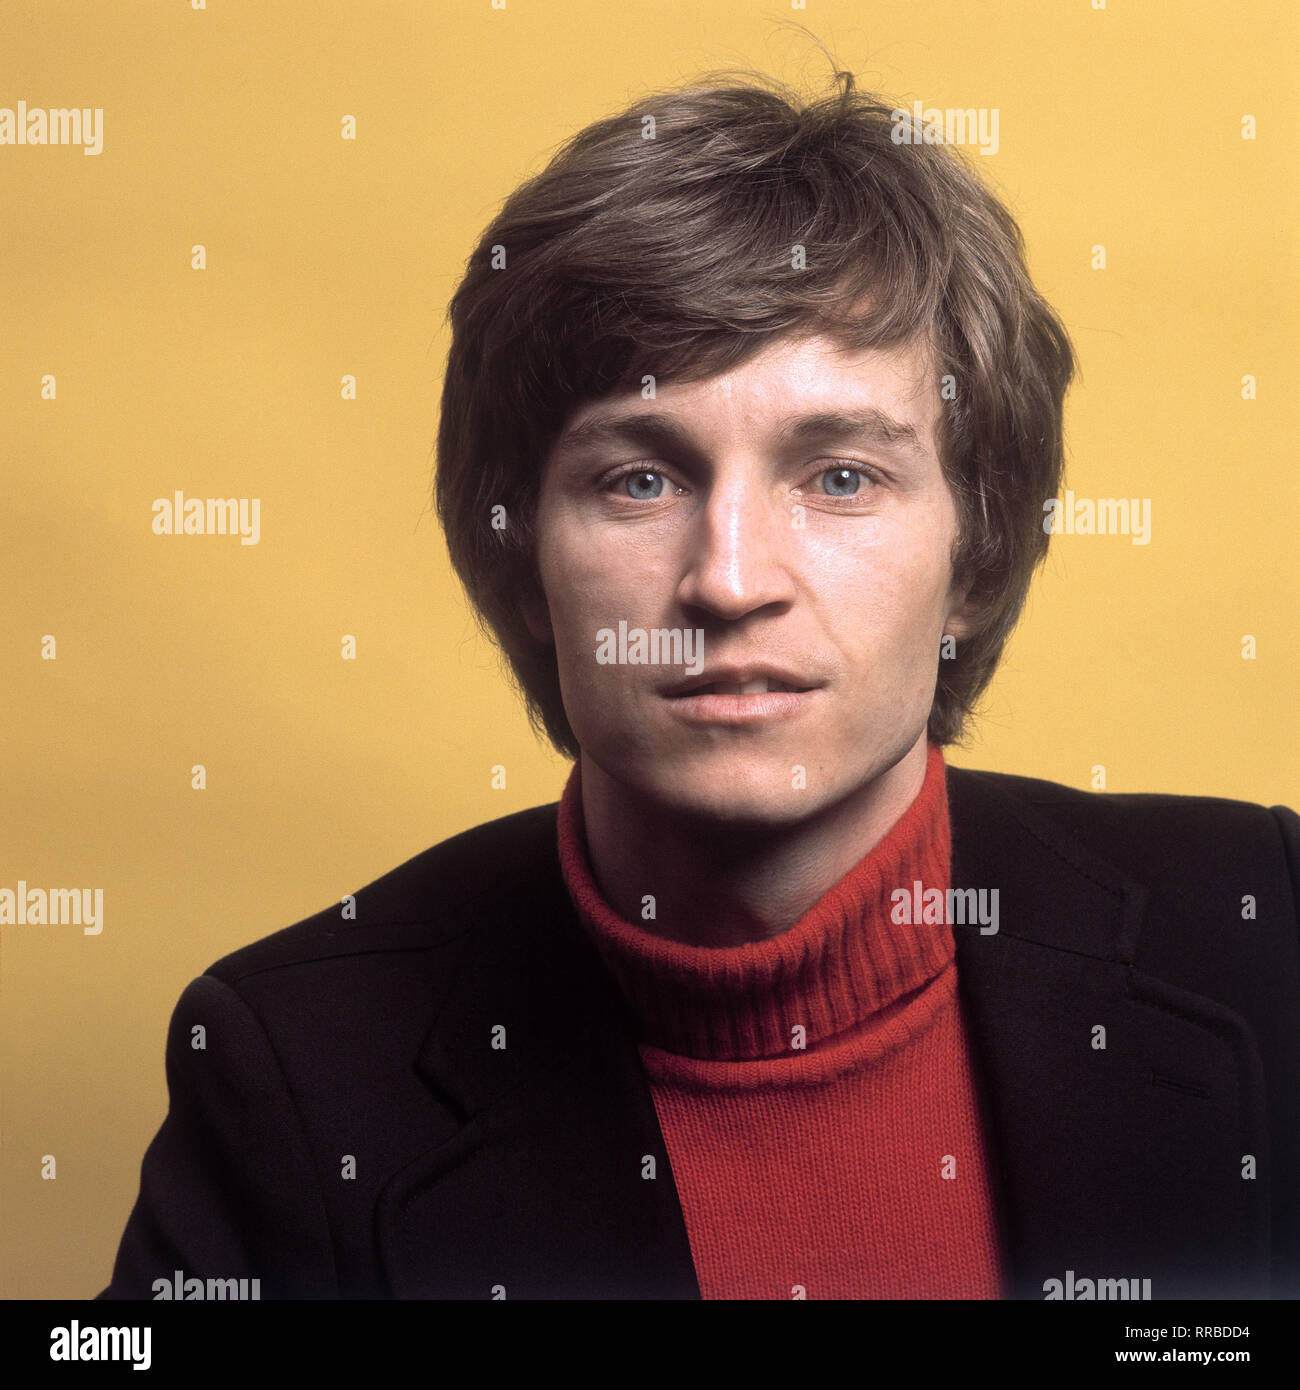 CHRISTIAN ANDERS / CHRISTIAN ANDERS, 70er Jahre. / Überschrift: CHRISTIAN ANDERS Stock Photo